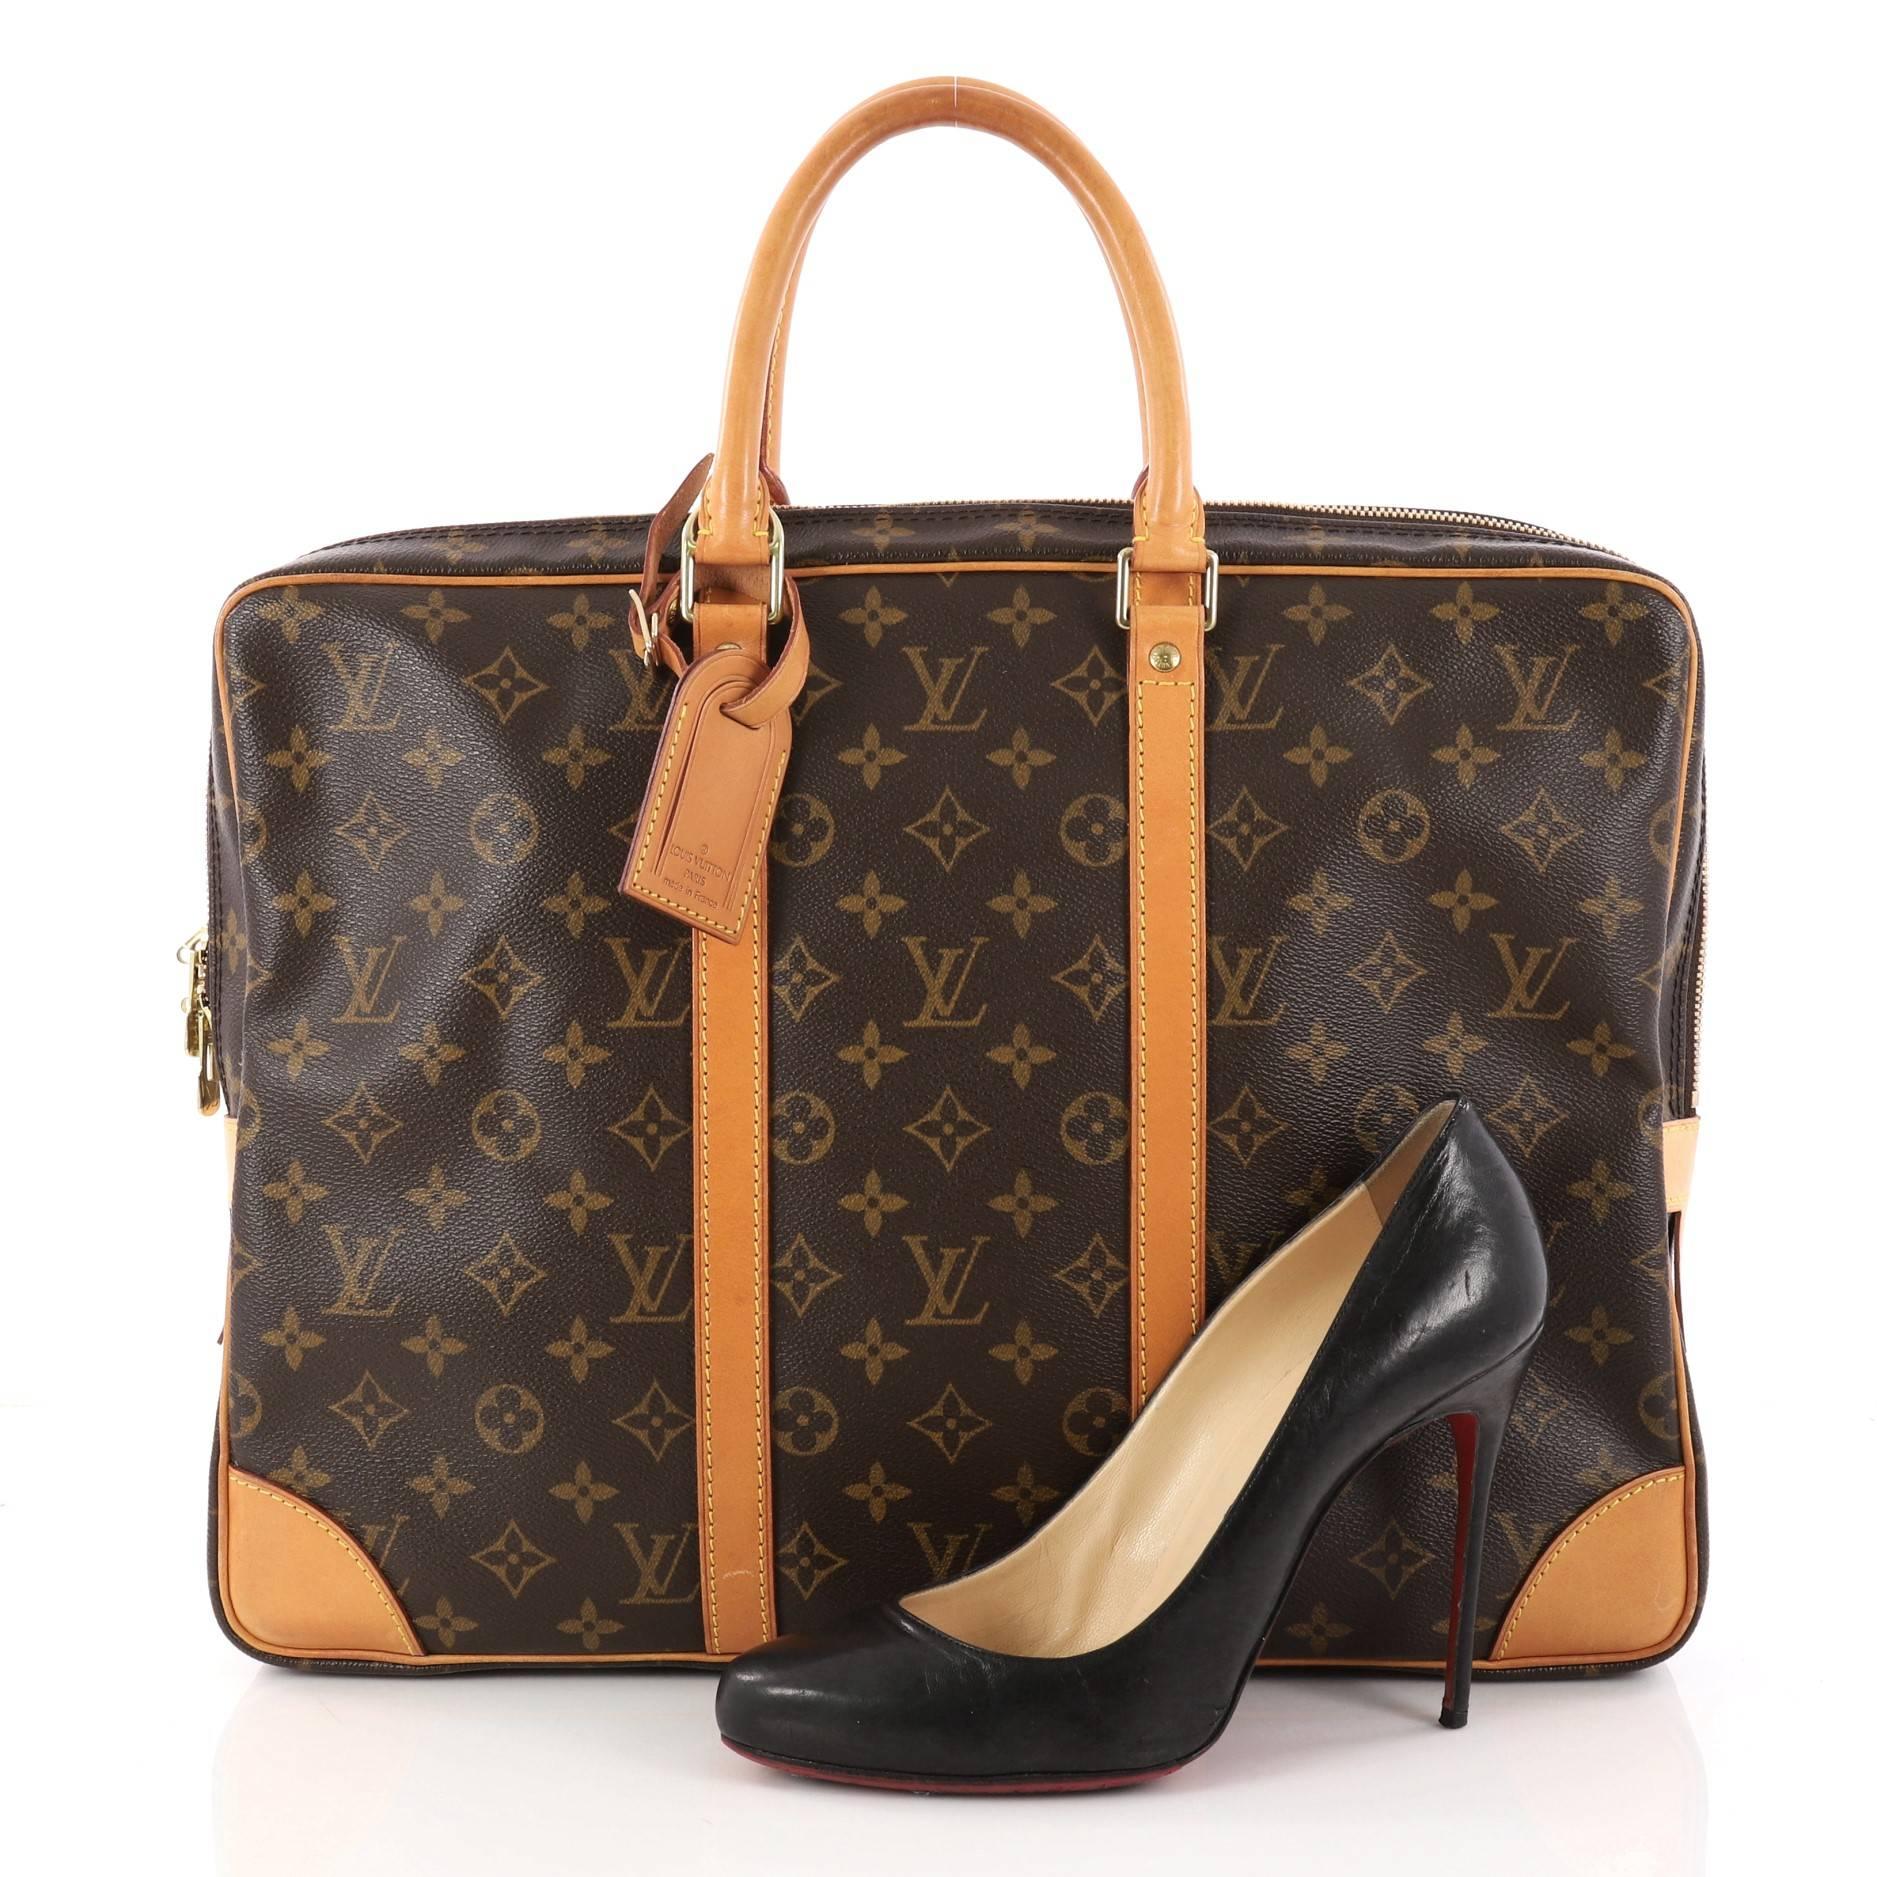 This authentic Louis Vuitton Porte-Documents Voyage Briefcase Monogram Canvas showcases a classic briefcase silhouette. Crafted from the brand's classic brown monogram coated canvas, this luxurious briefcase features dual-rolled leather handles,